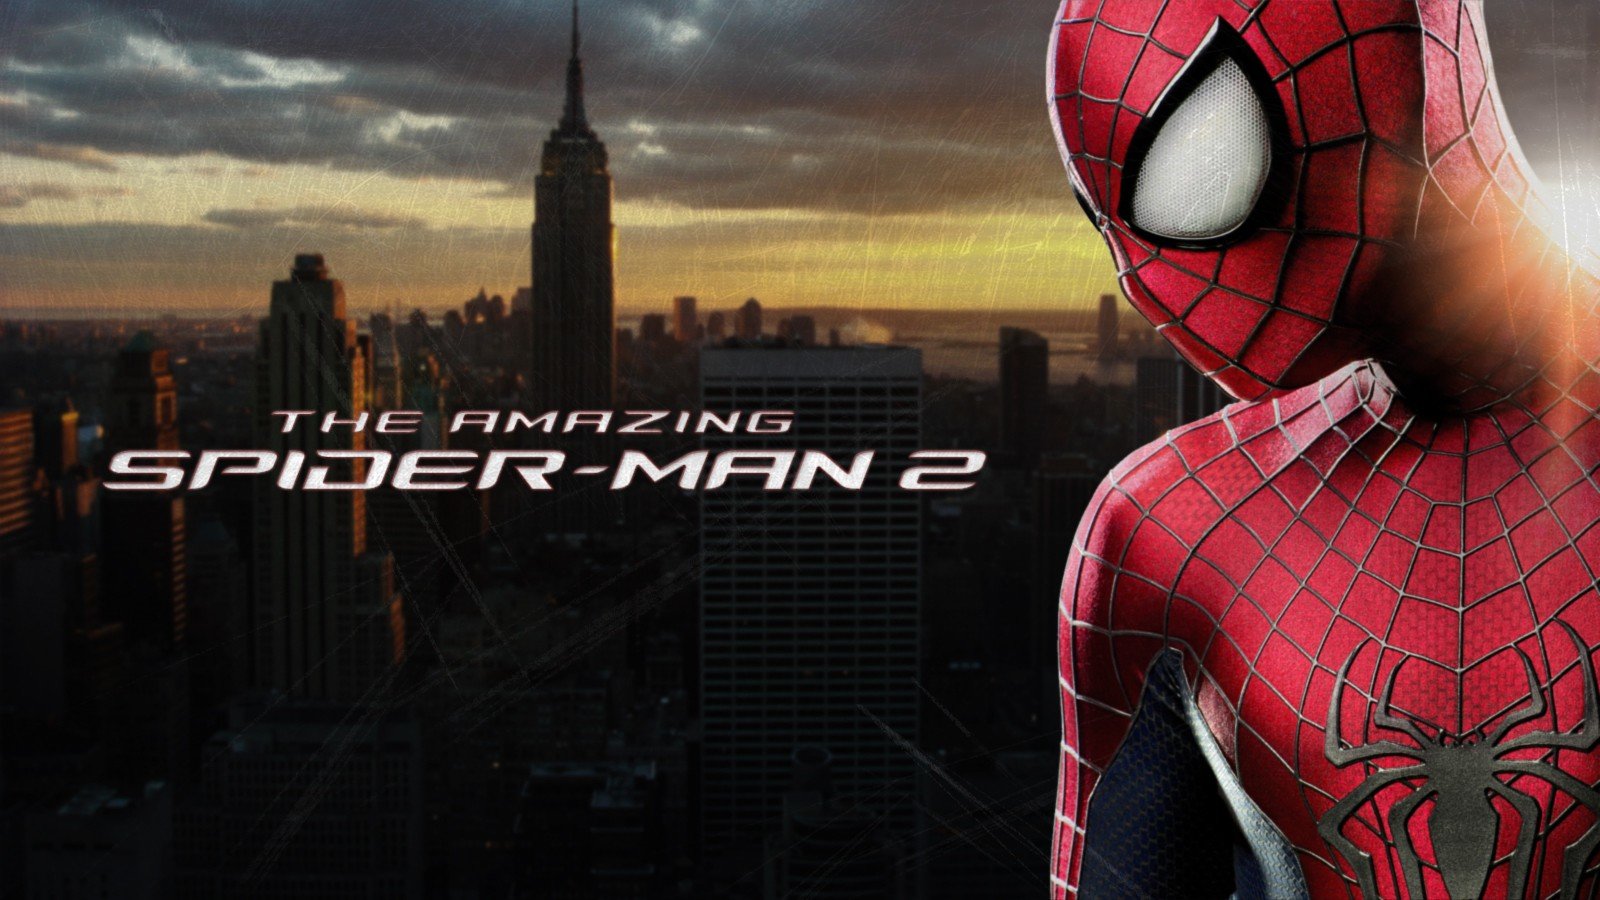 Download hd 1600x900 The Amazing Spider-Man 2 PC background ID:102253 for free